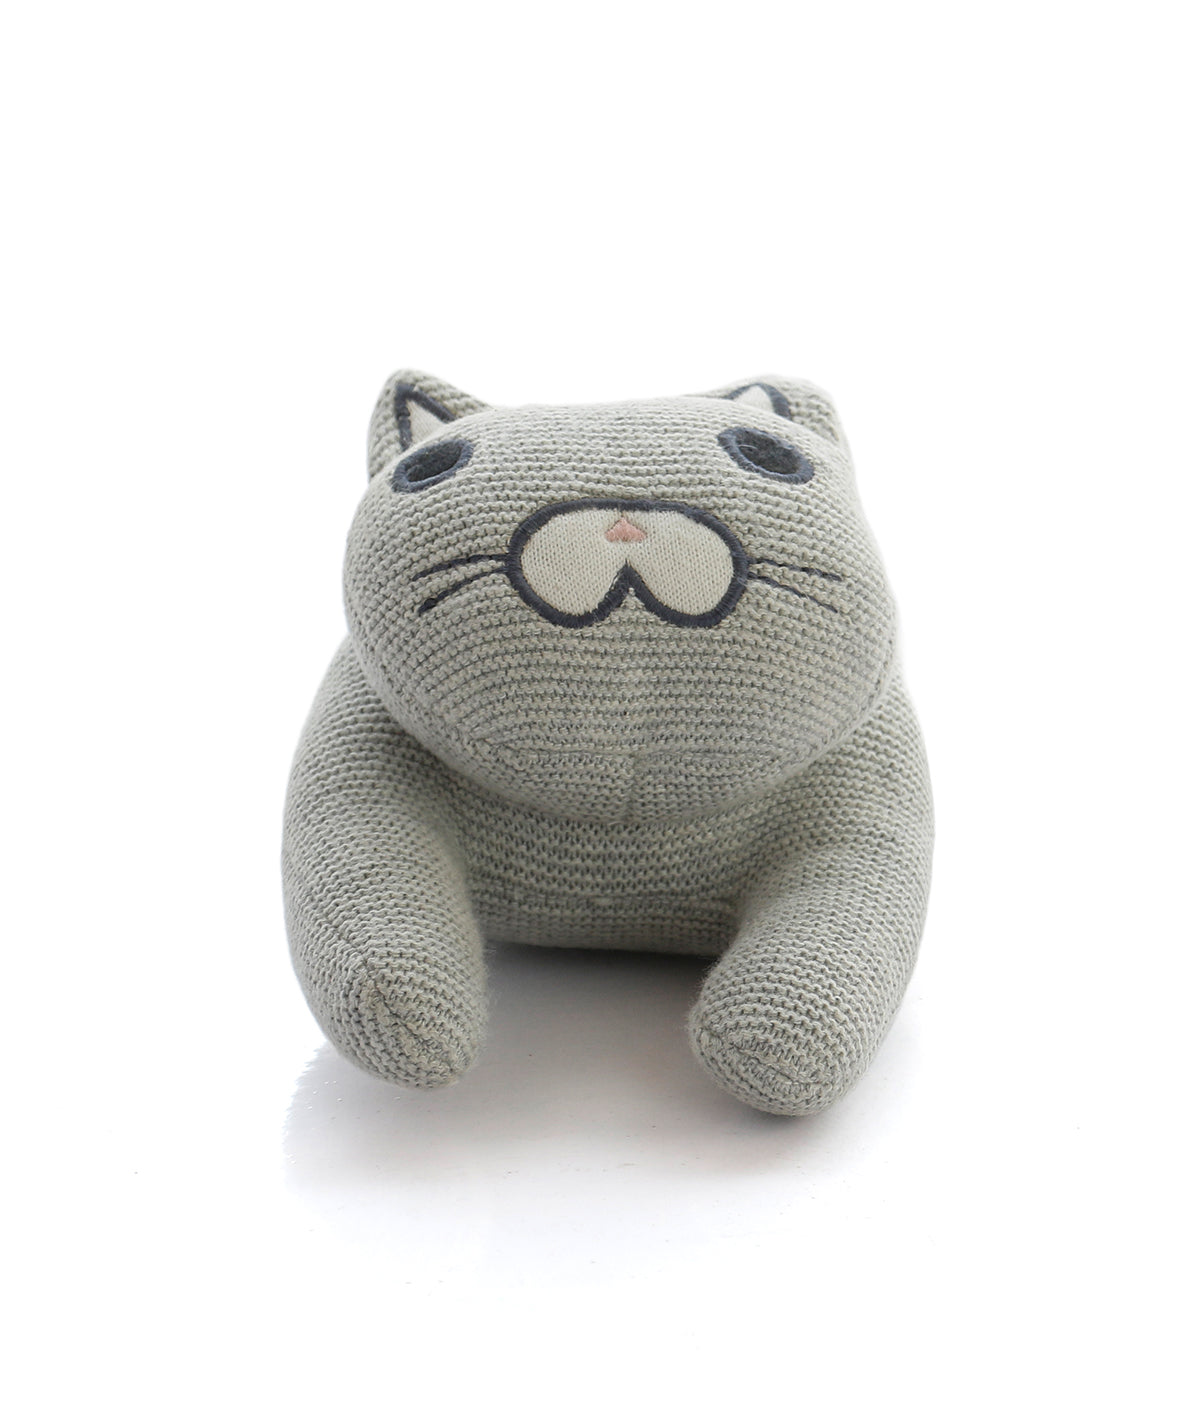 Flying Cat - Vanila Grey Color 100% Cotton Knitted Stuffed Soft Toy For Babies / Kids